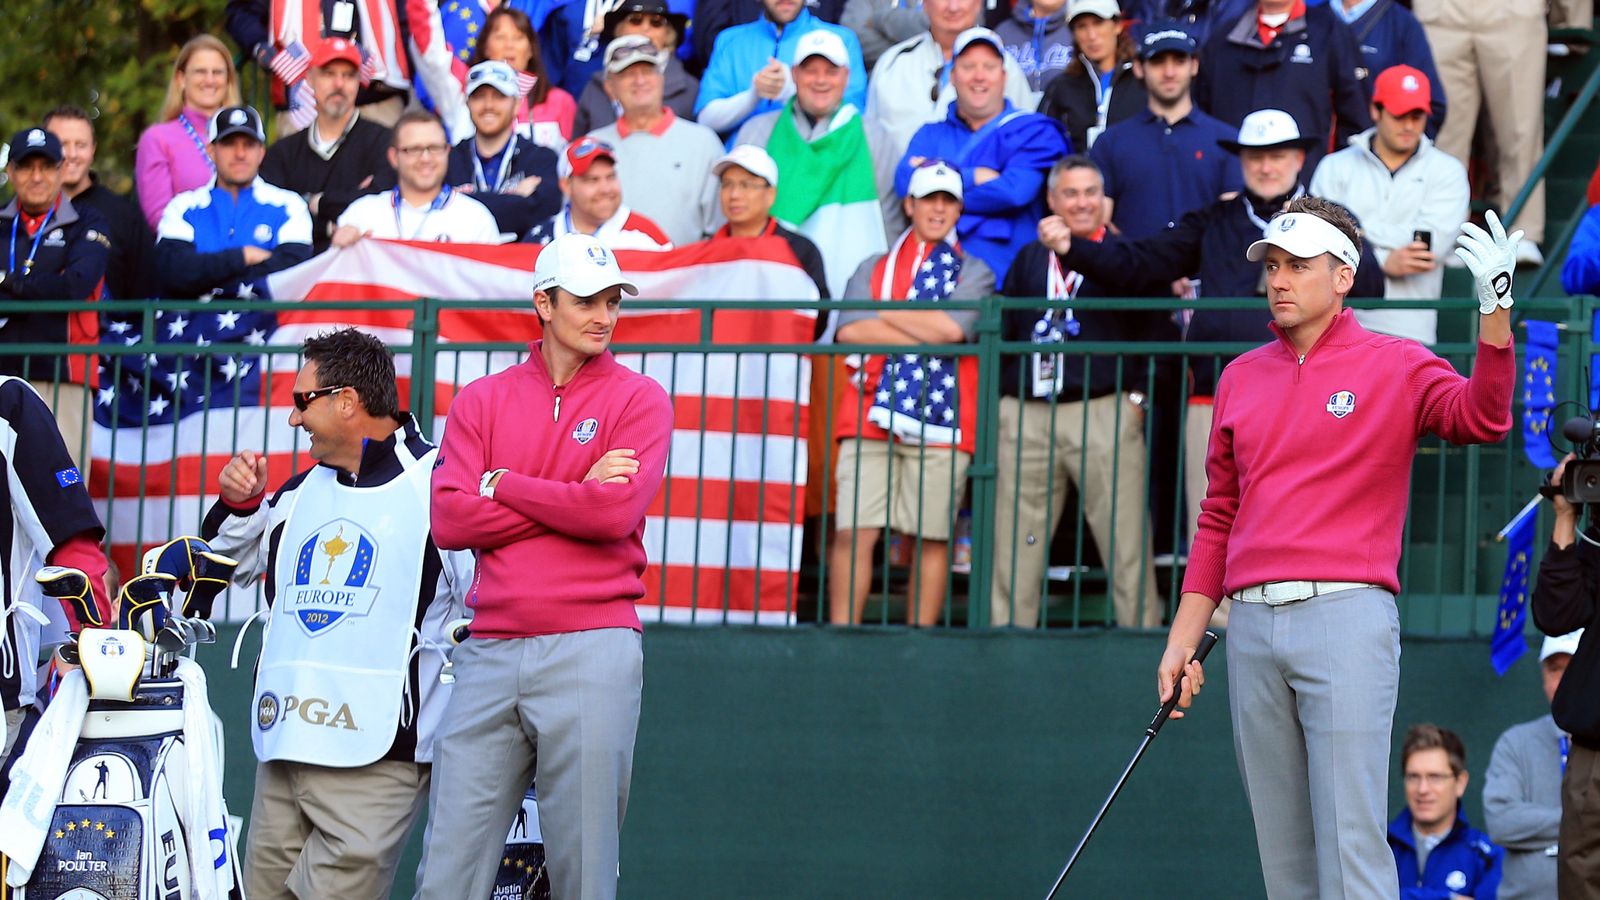 Ryder Cup moments, 14 days to go Ian Poulter on the tee at Medinah